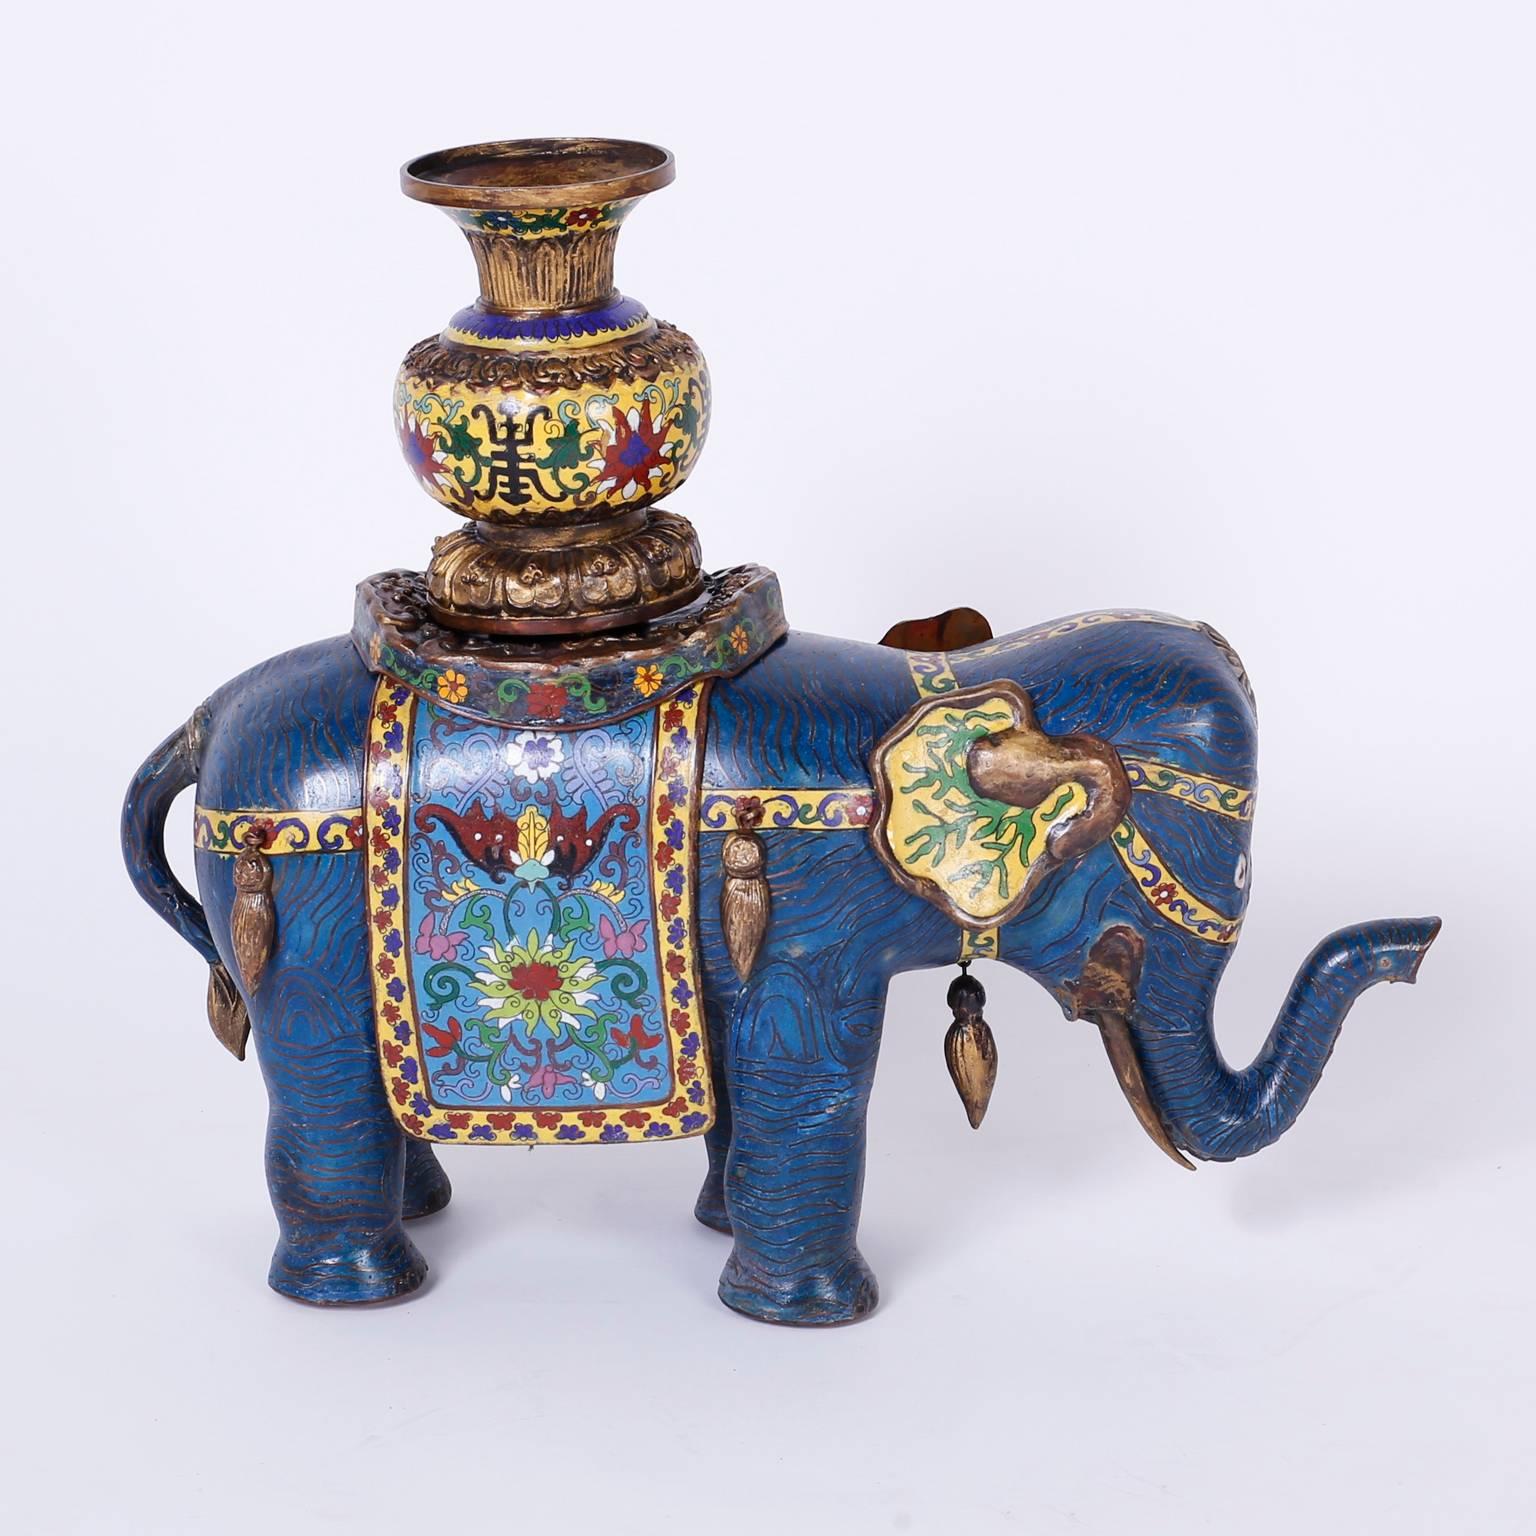 Highly unusual and decorative pair of vintage cloisonné elephants, decorated with floral and geometric enamel designs that can be enjoyed for what they are, or can be used as planters. The removable vessels or urns can hold orchid moss, the bodies